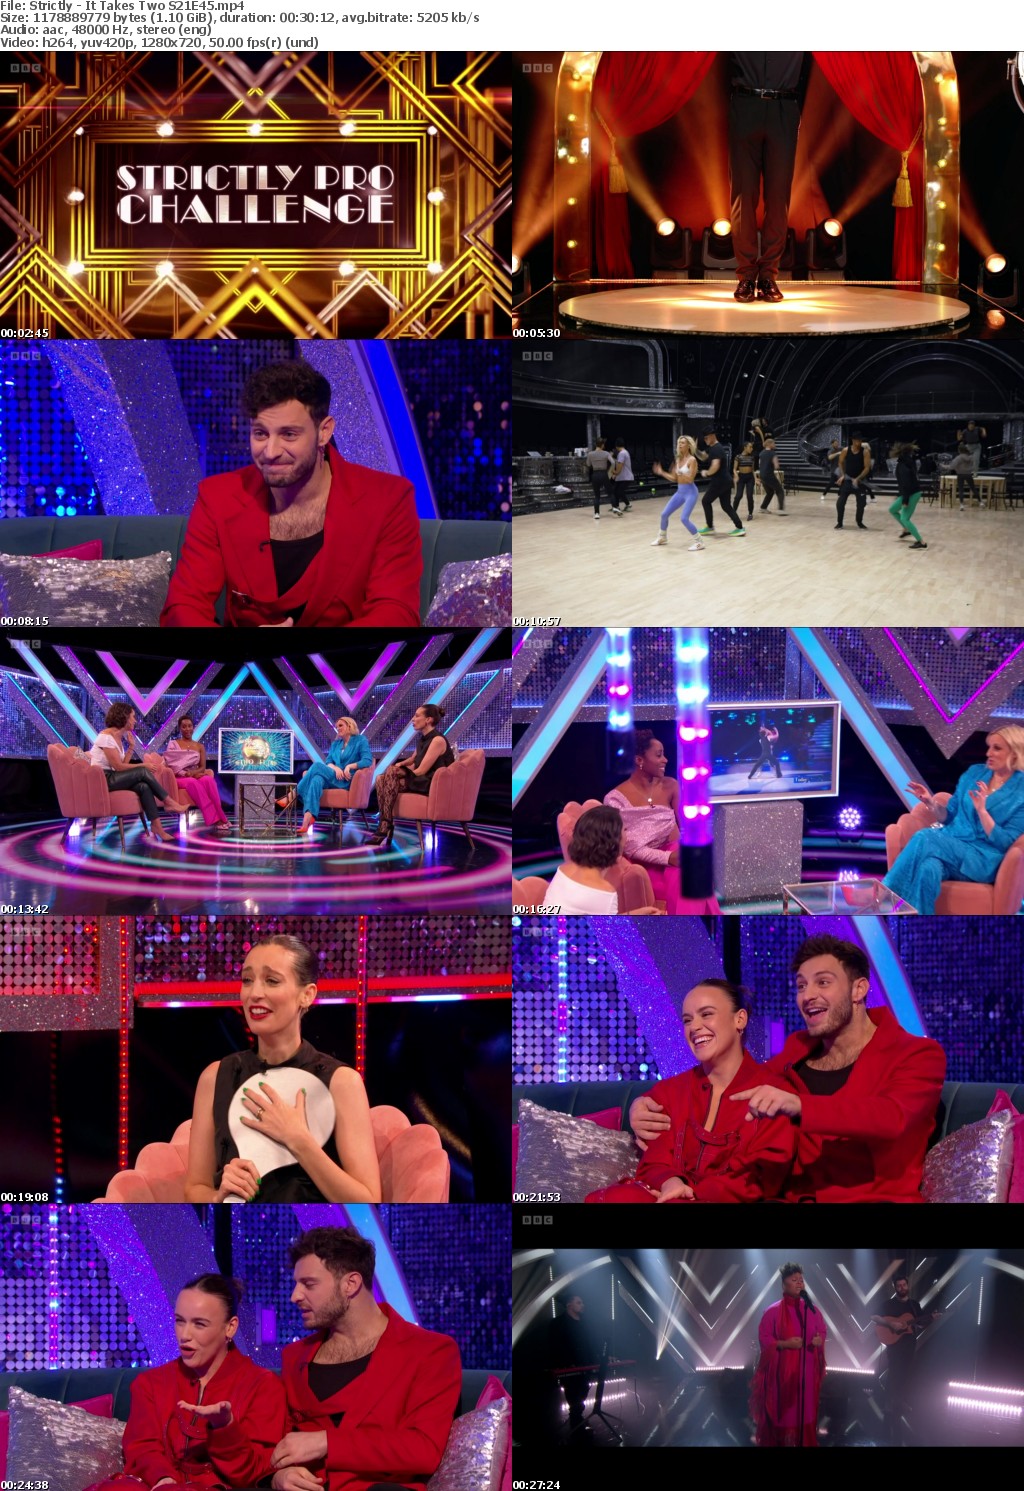 Strictly - It Takes Two S21E45 (1280x720p HD, 50fps, soft Eng subs)